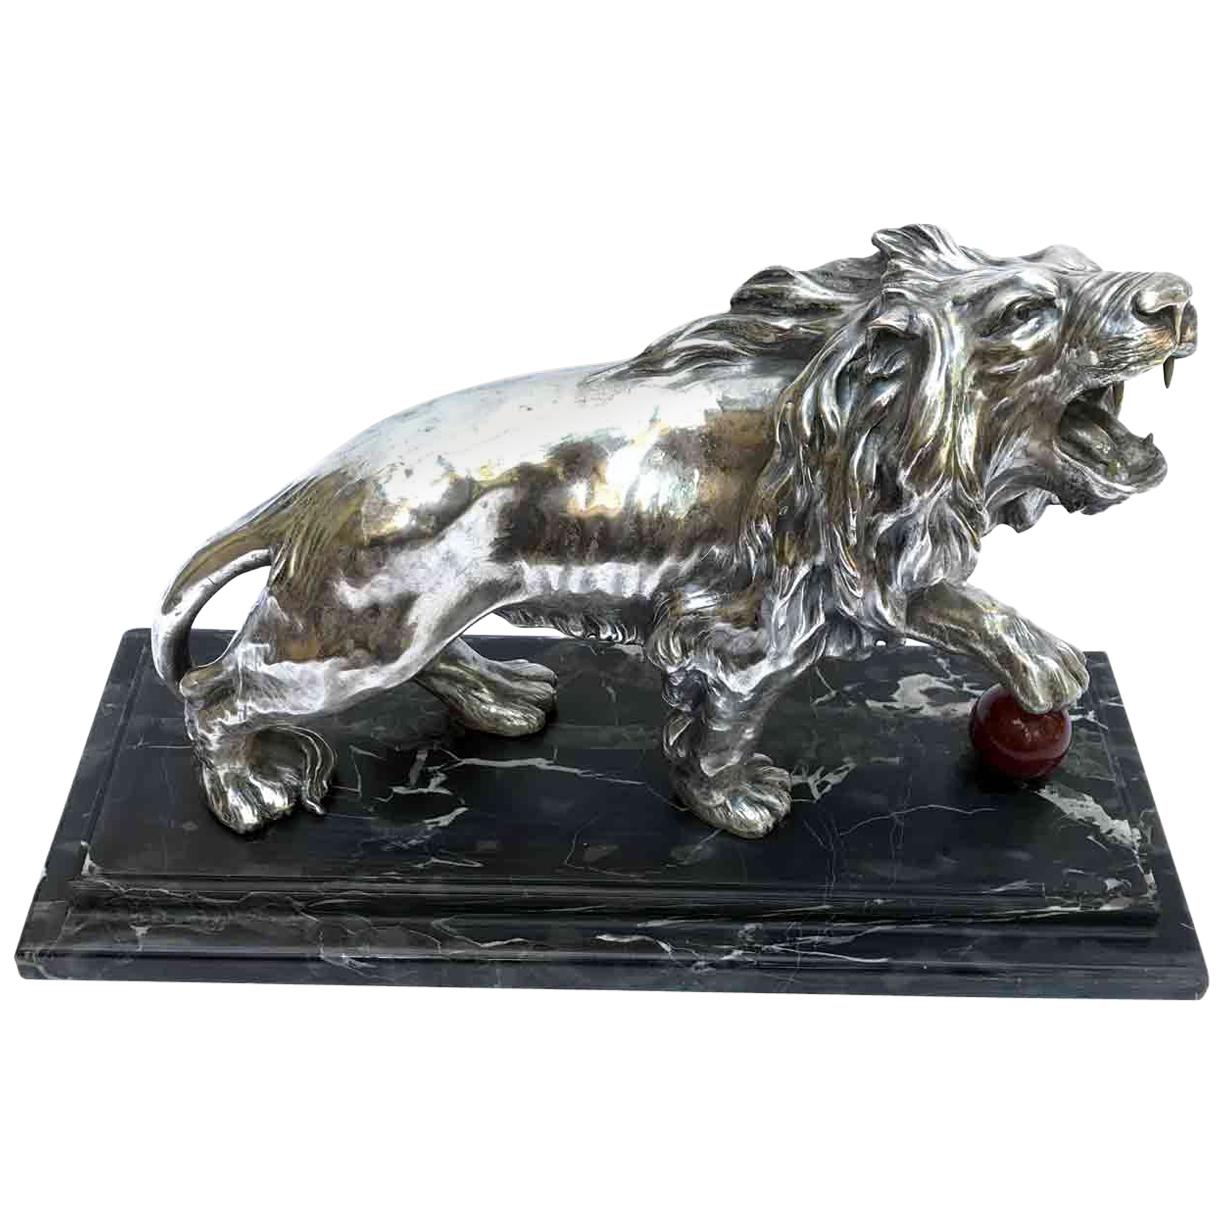 20th Century Italian Medici Lion Figure After Flaminio Vacca by Fabris M.